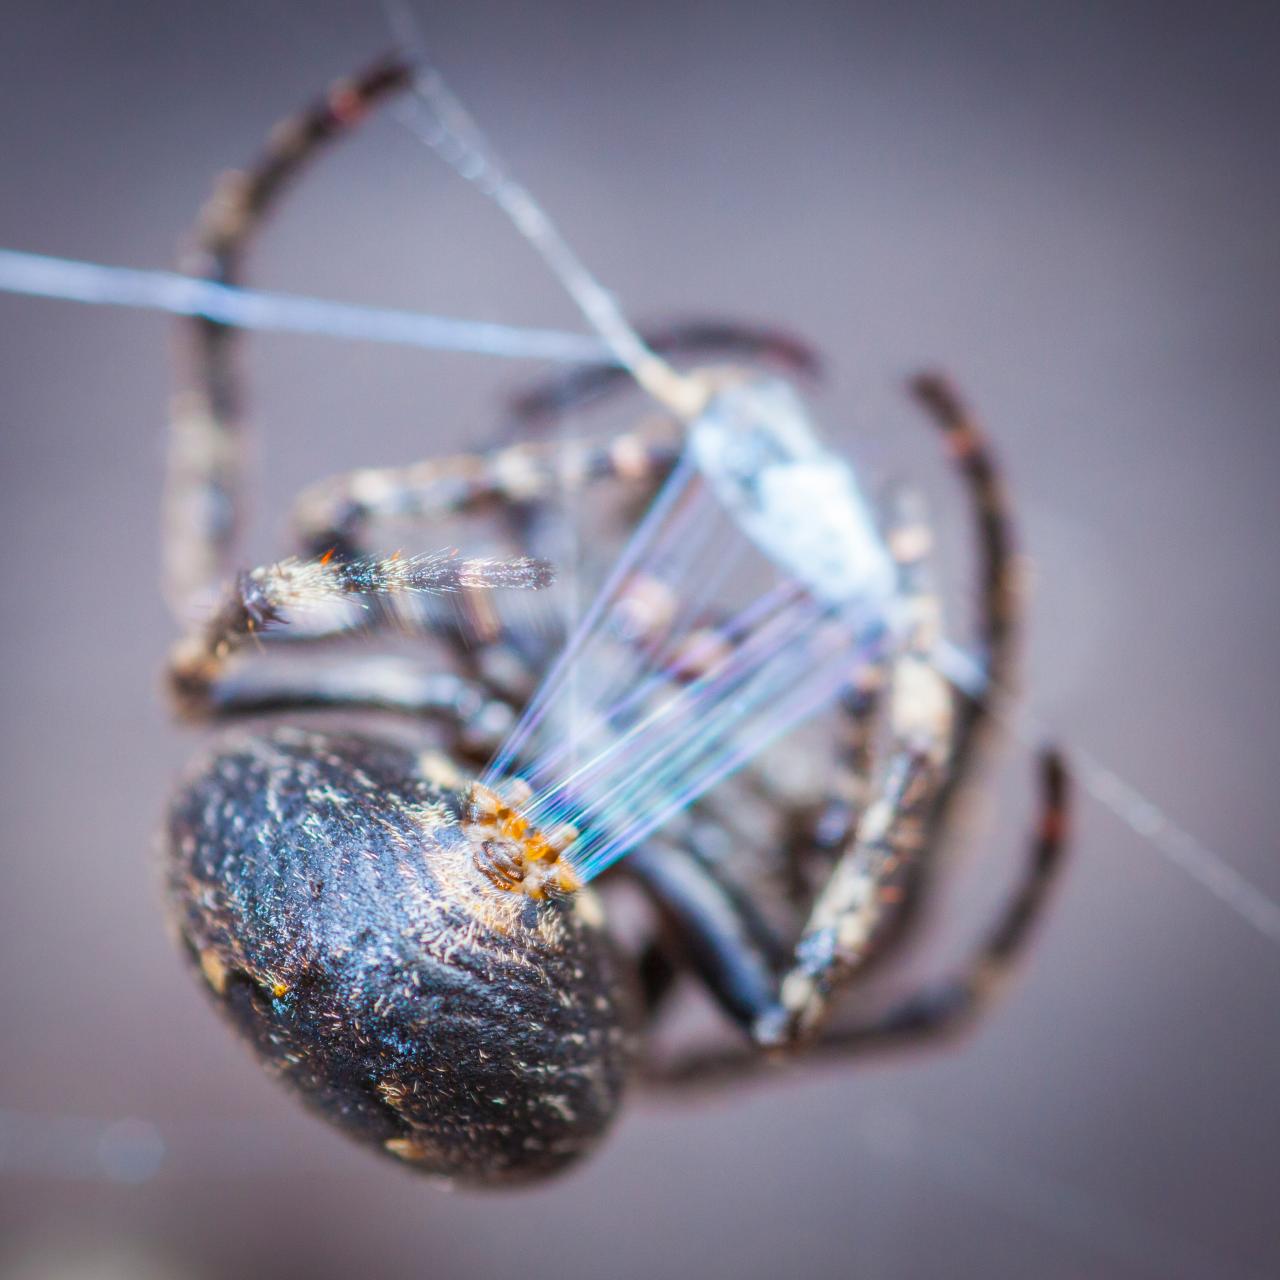 5 Fascinating Uses of Spider Silk